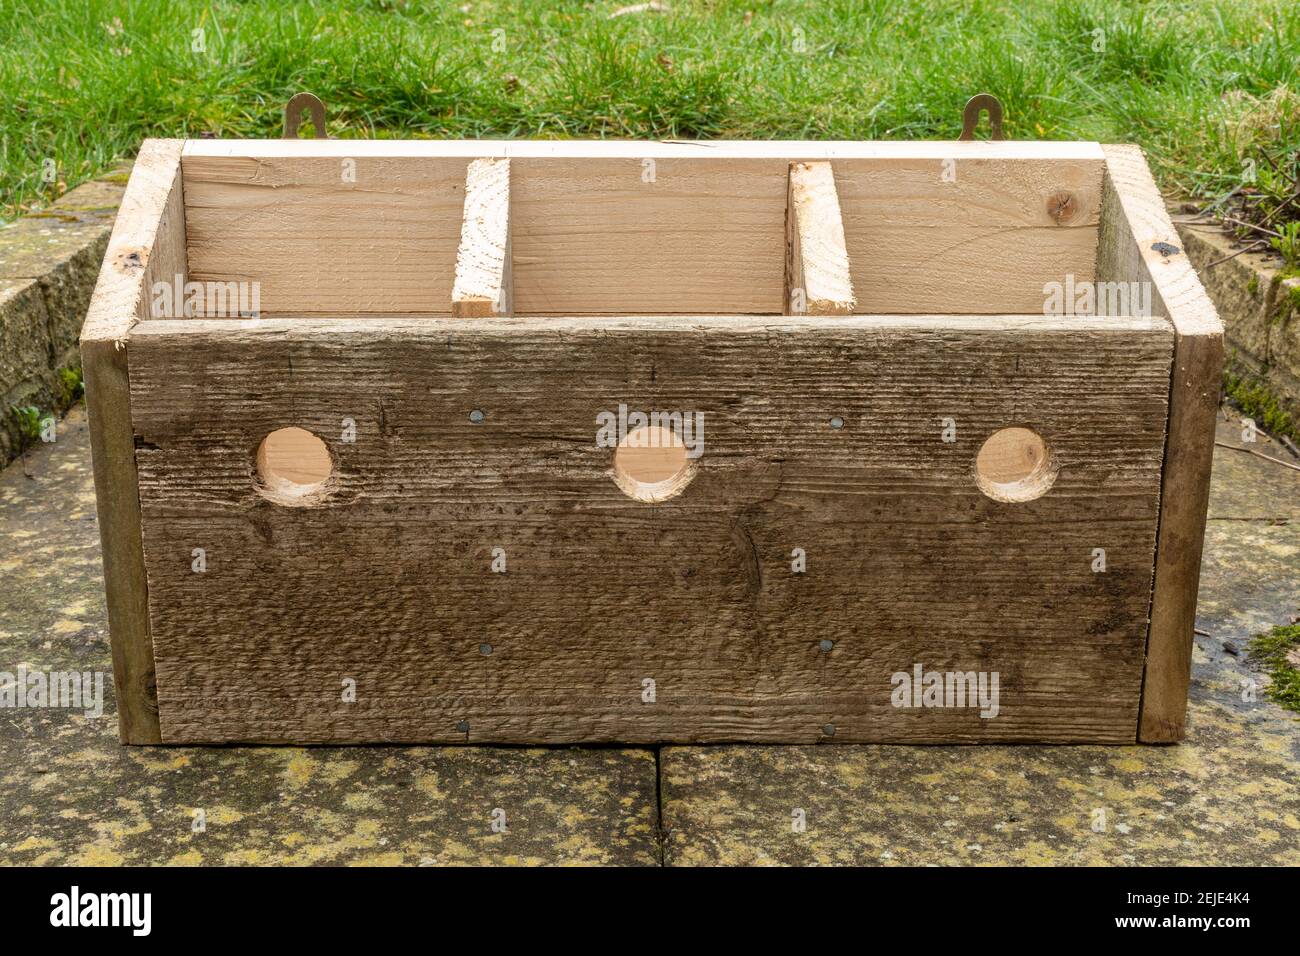 Homemade sparrow box, wooden bird nesting box for house sparrows with three chambers and holes, view of the inside with the roof off, UK Stock Photo